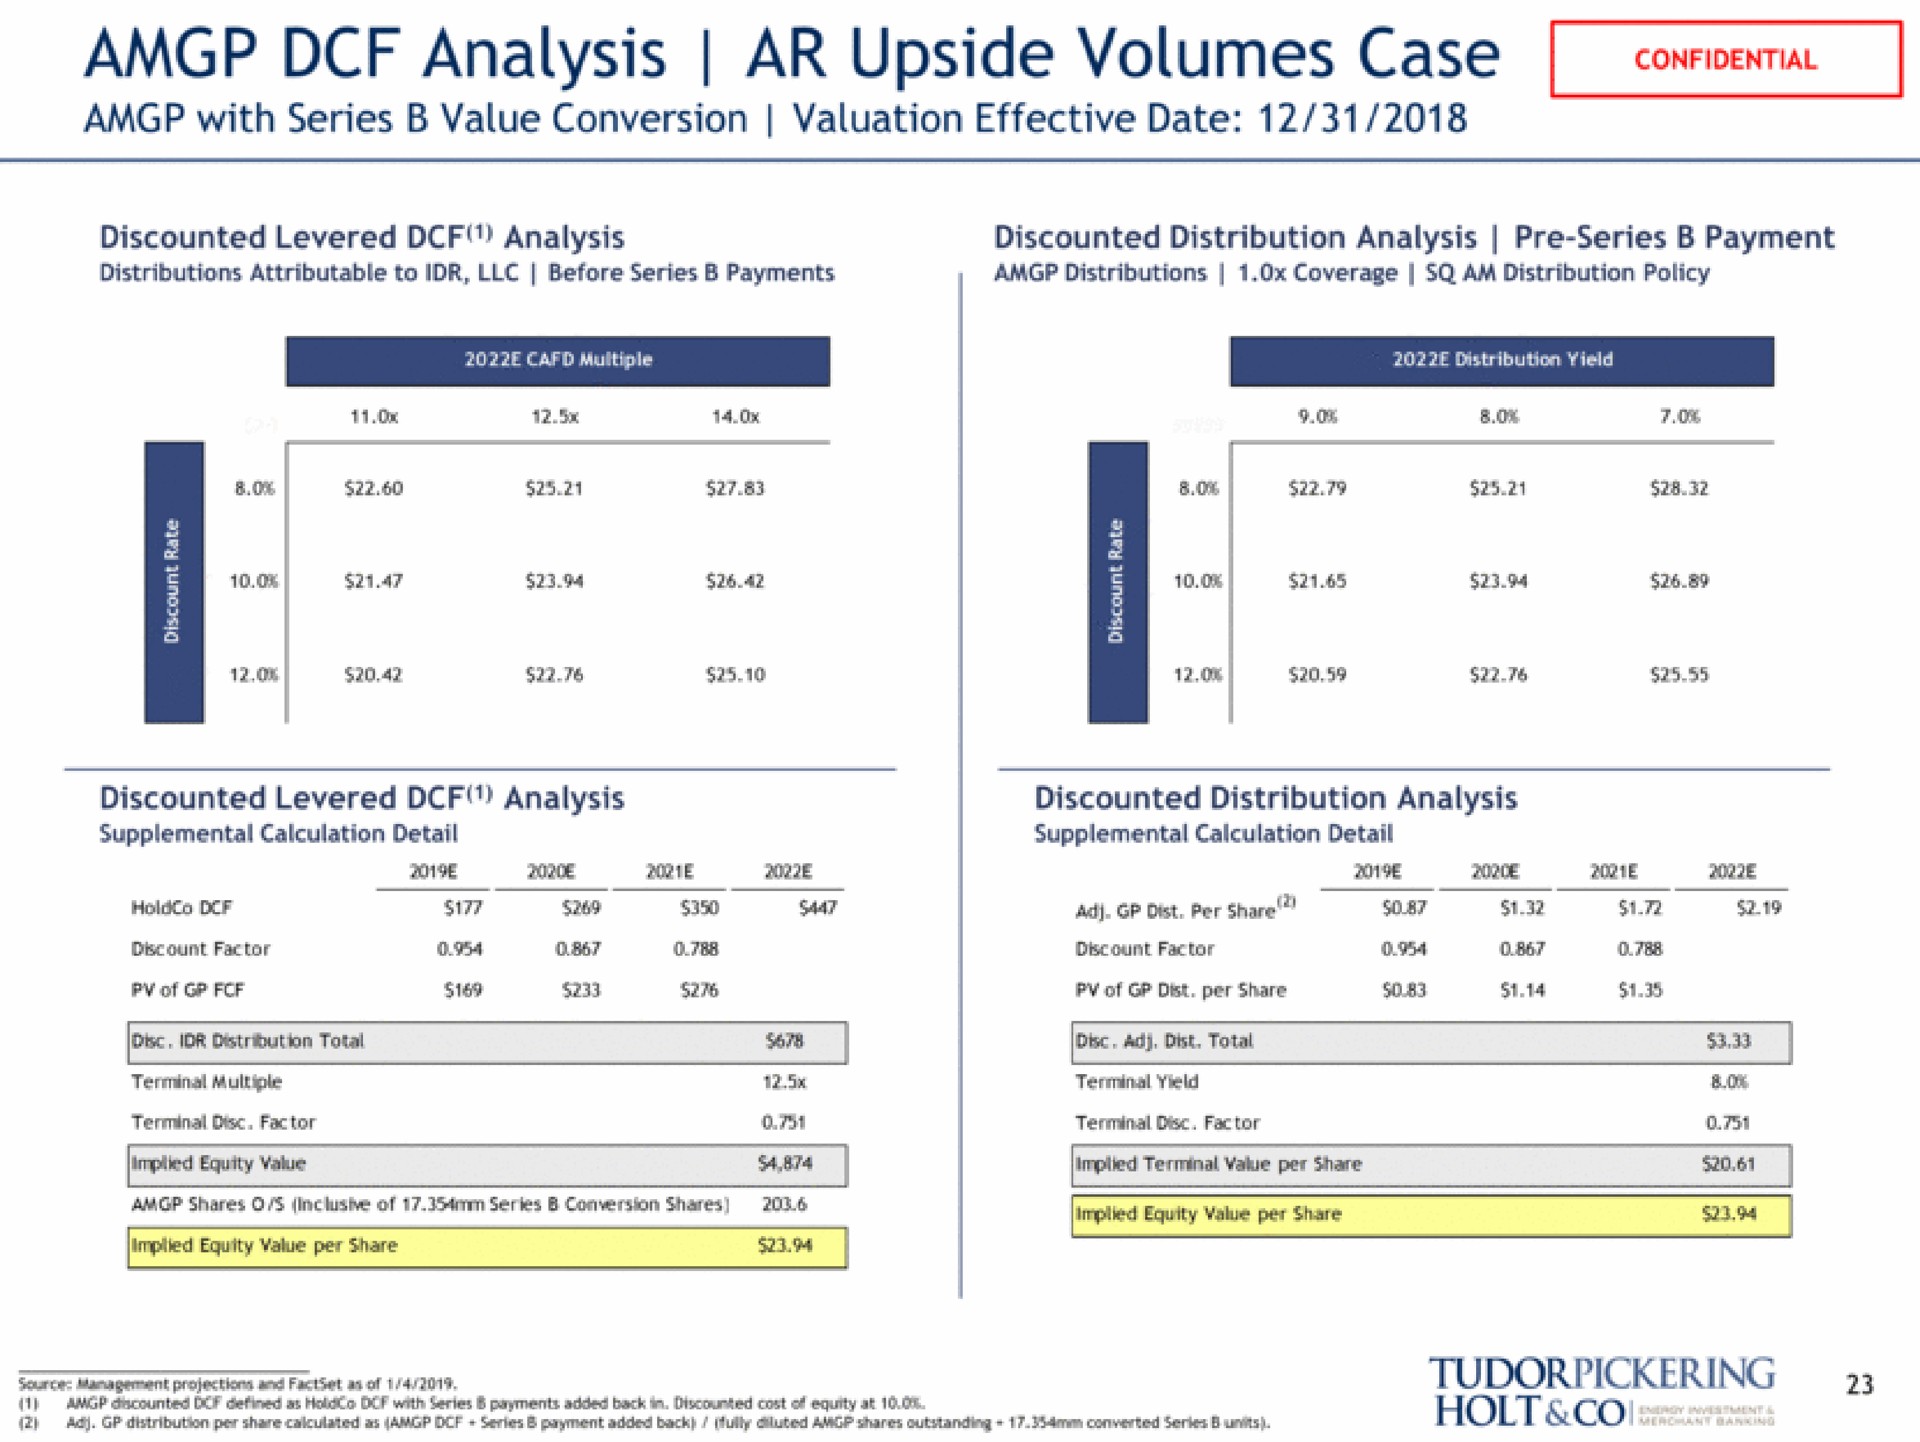 analysis upside volumes case with series value conversion valuation effective date tot son projections | Tudor, Pickering, Holt & Co